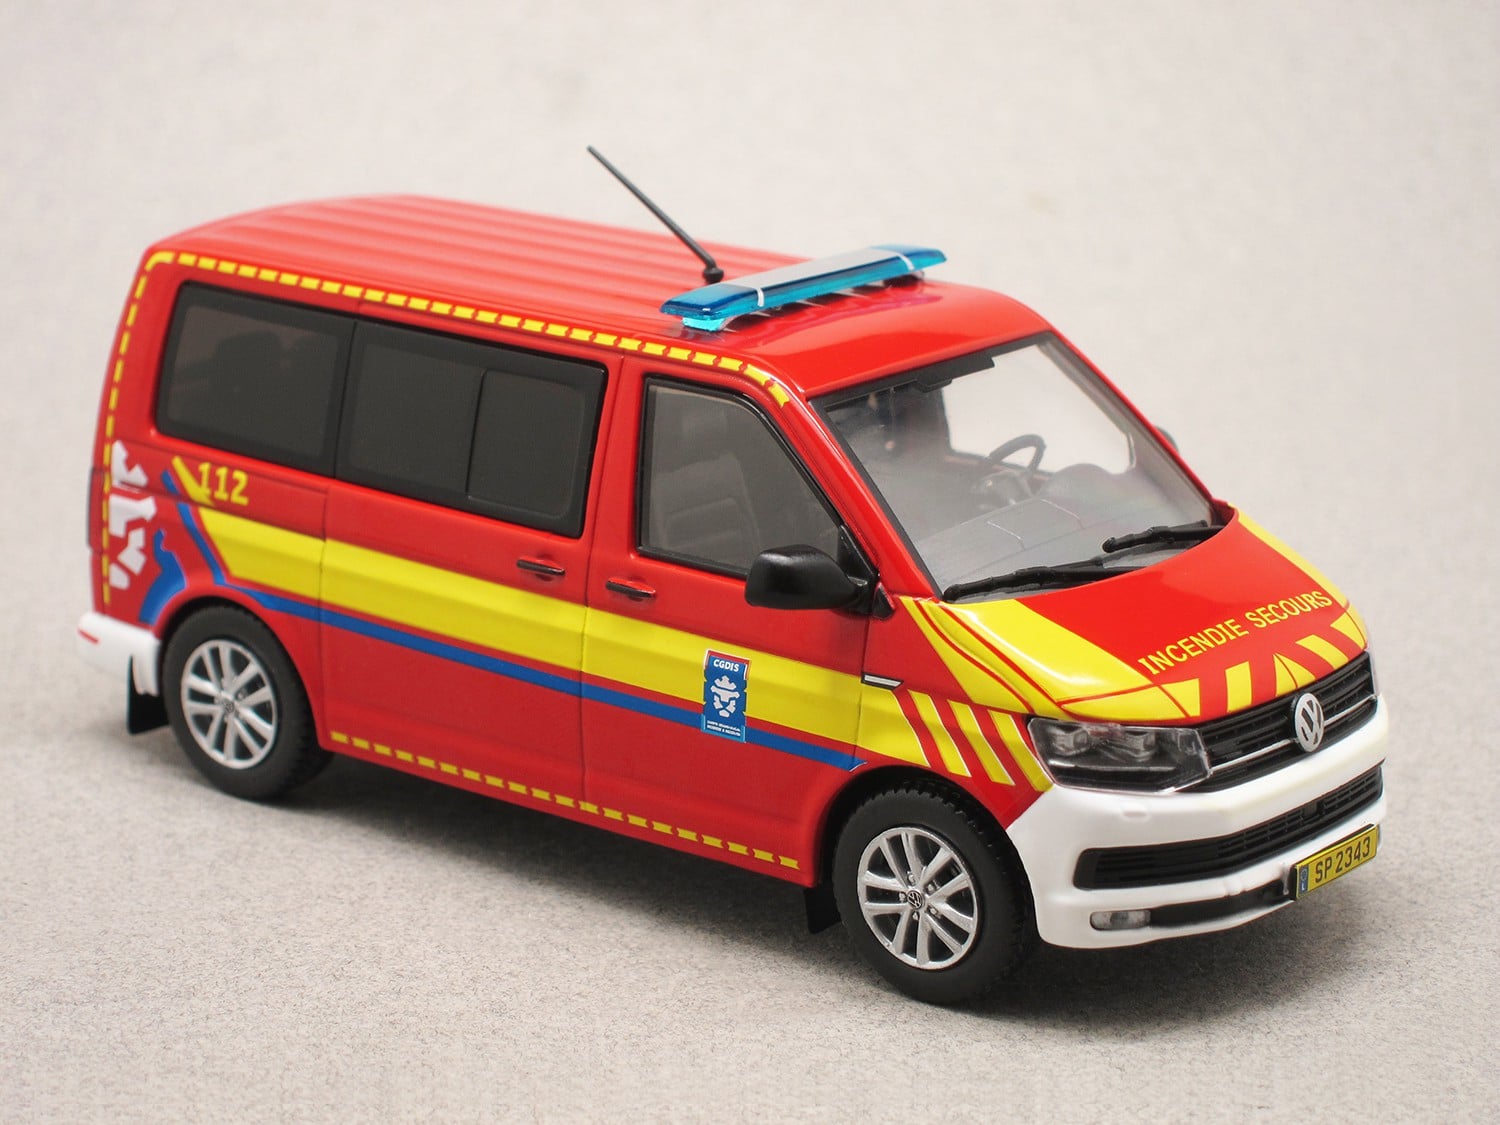 Volkswagen T6 fire rescue Luxembourg (Odeon) 1:43